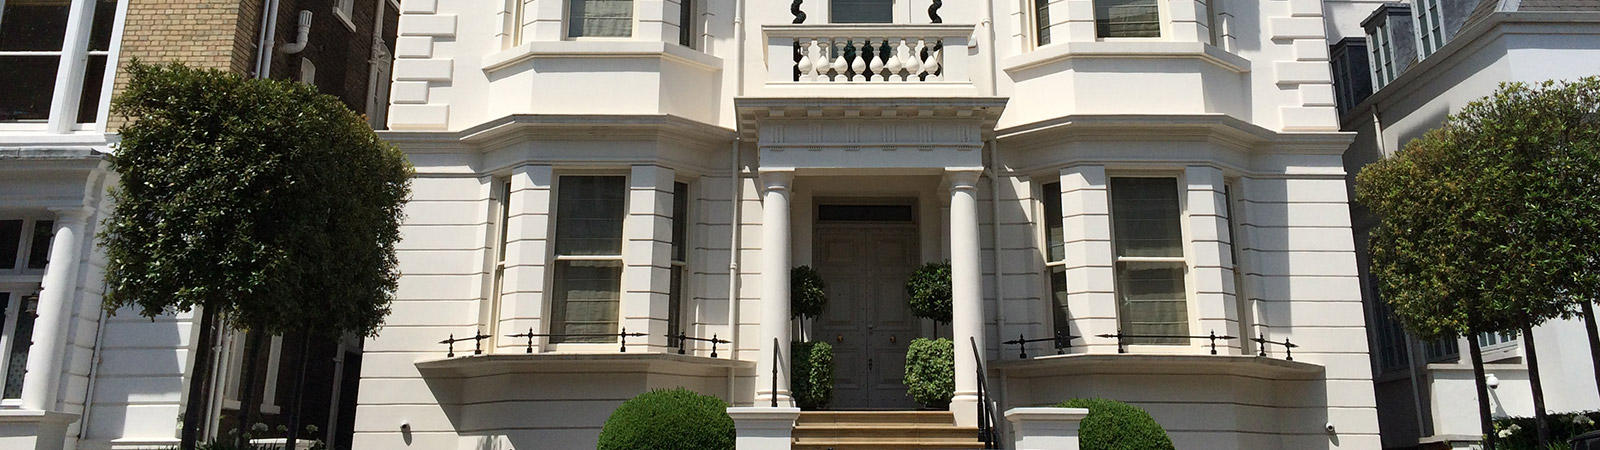 investment property search in Kensington